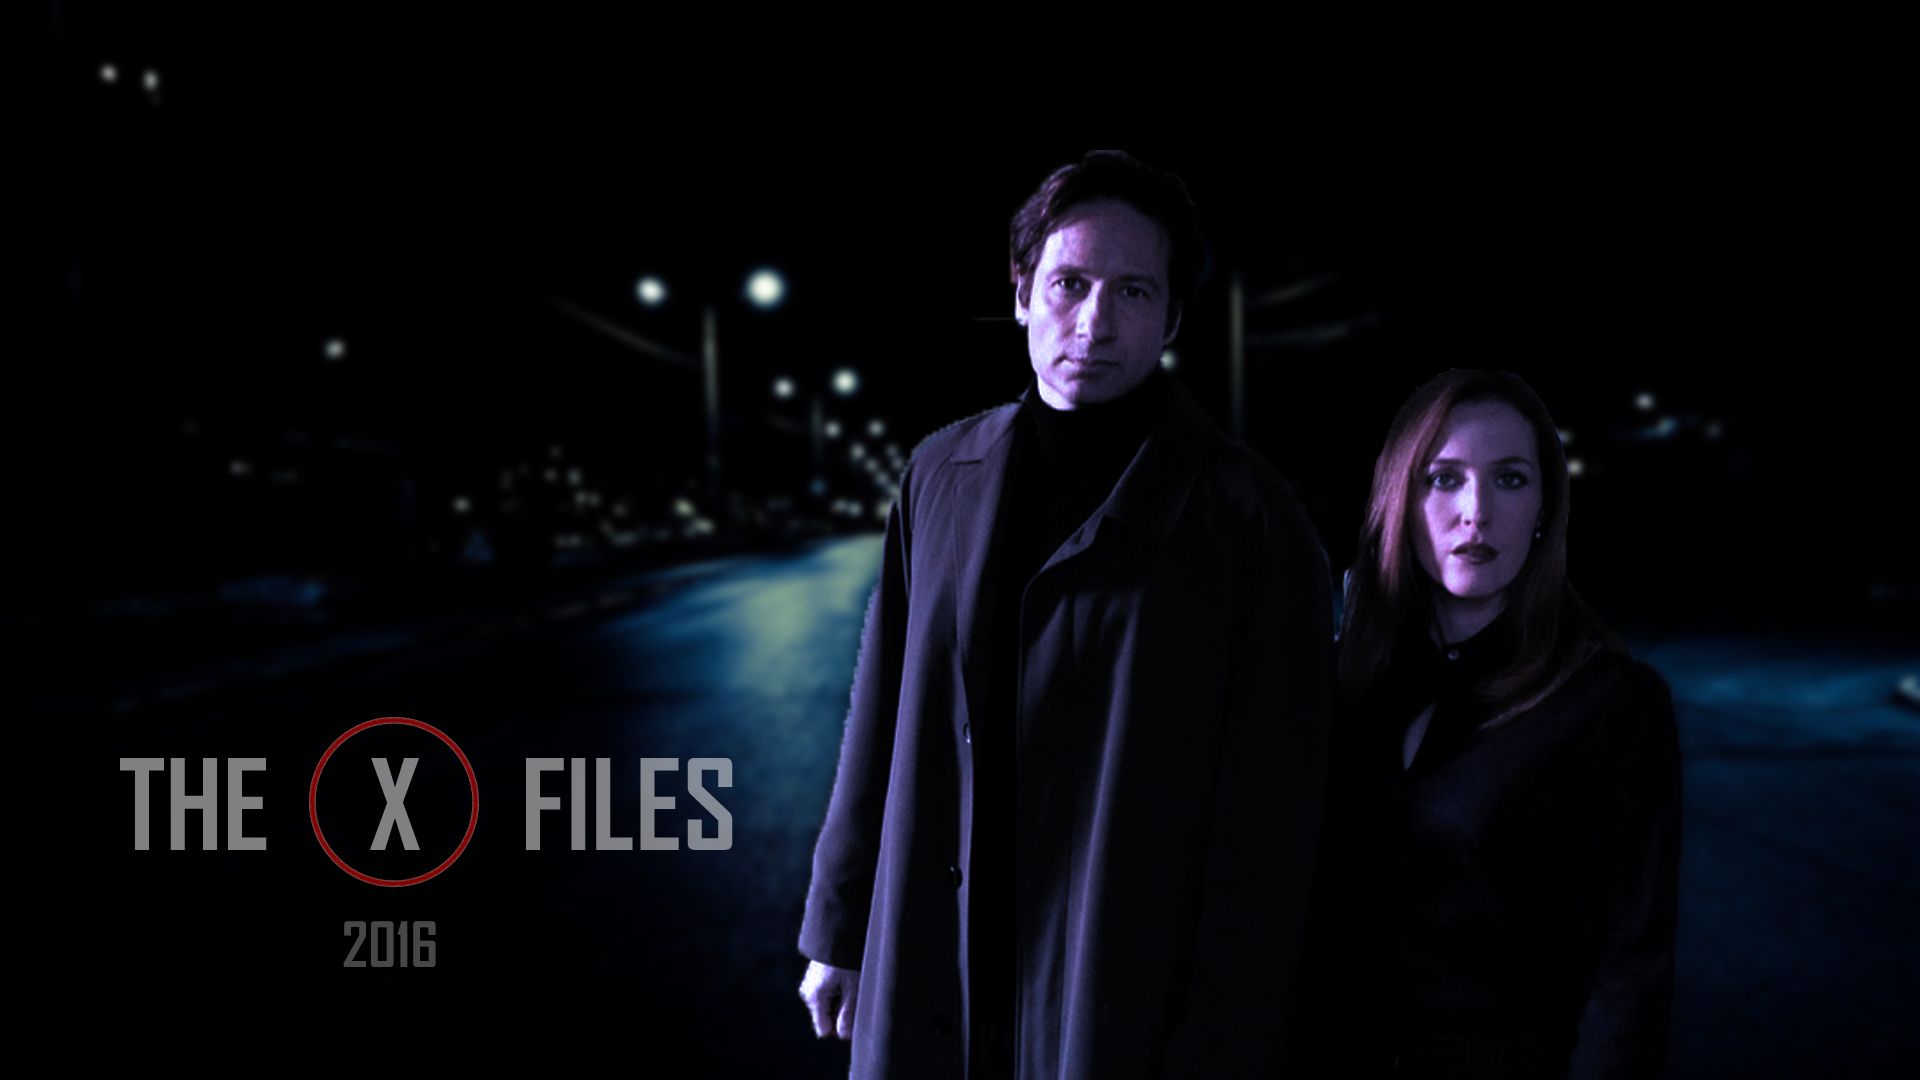 The X-Files 2016 Wallpapers High Resolution and Quality Download